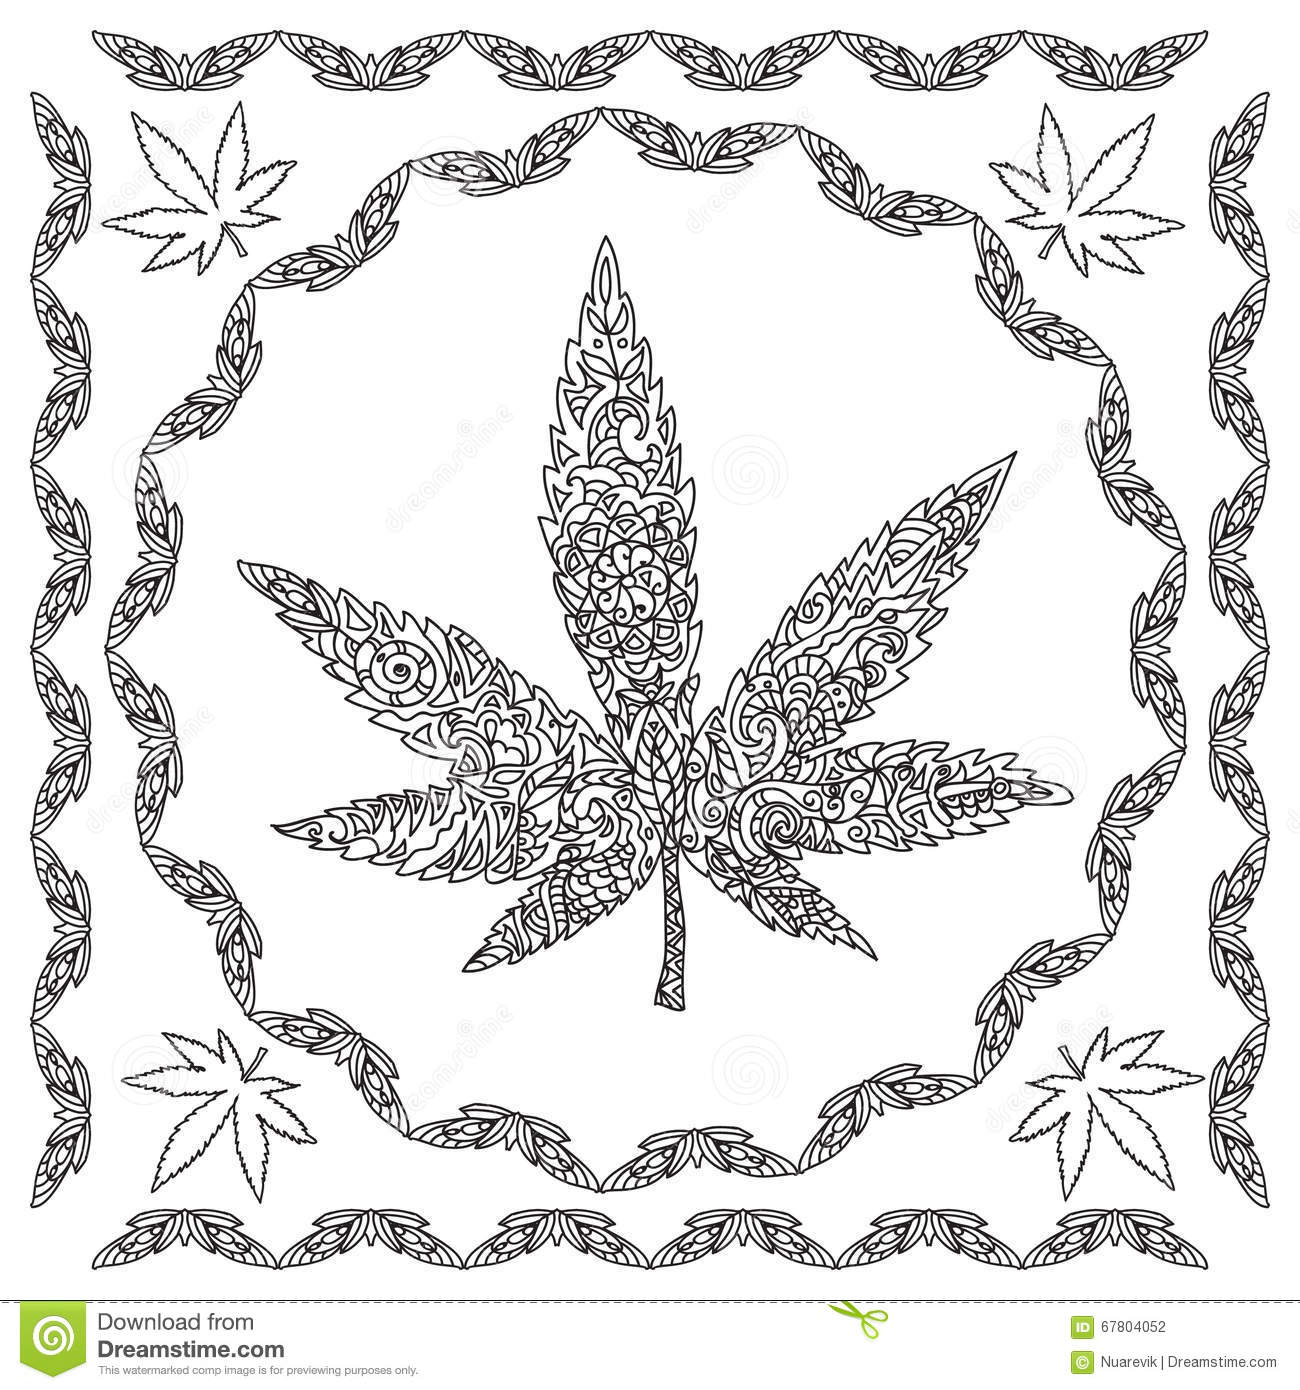 Cannabis coloring, Download Cannabis coloring for free 2019